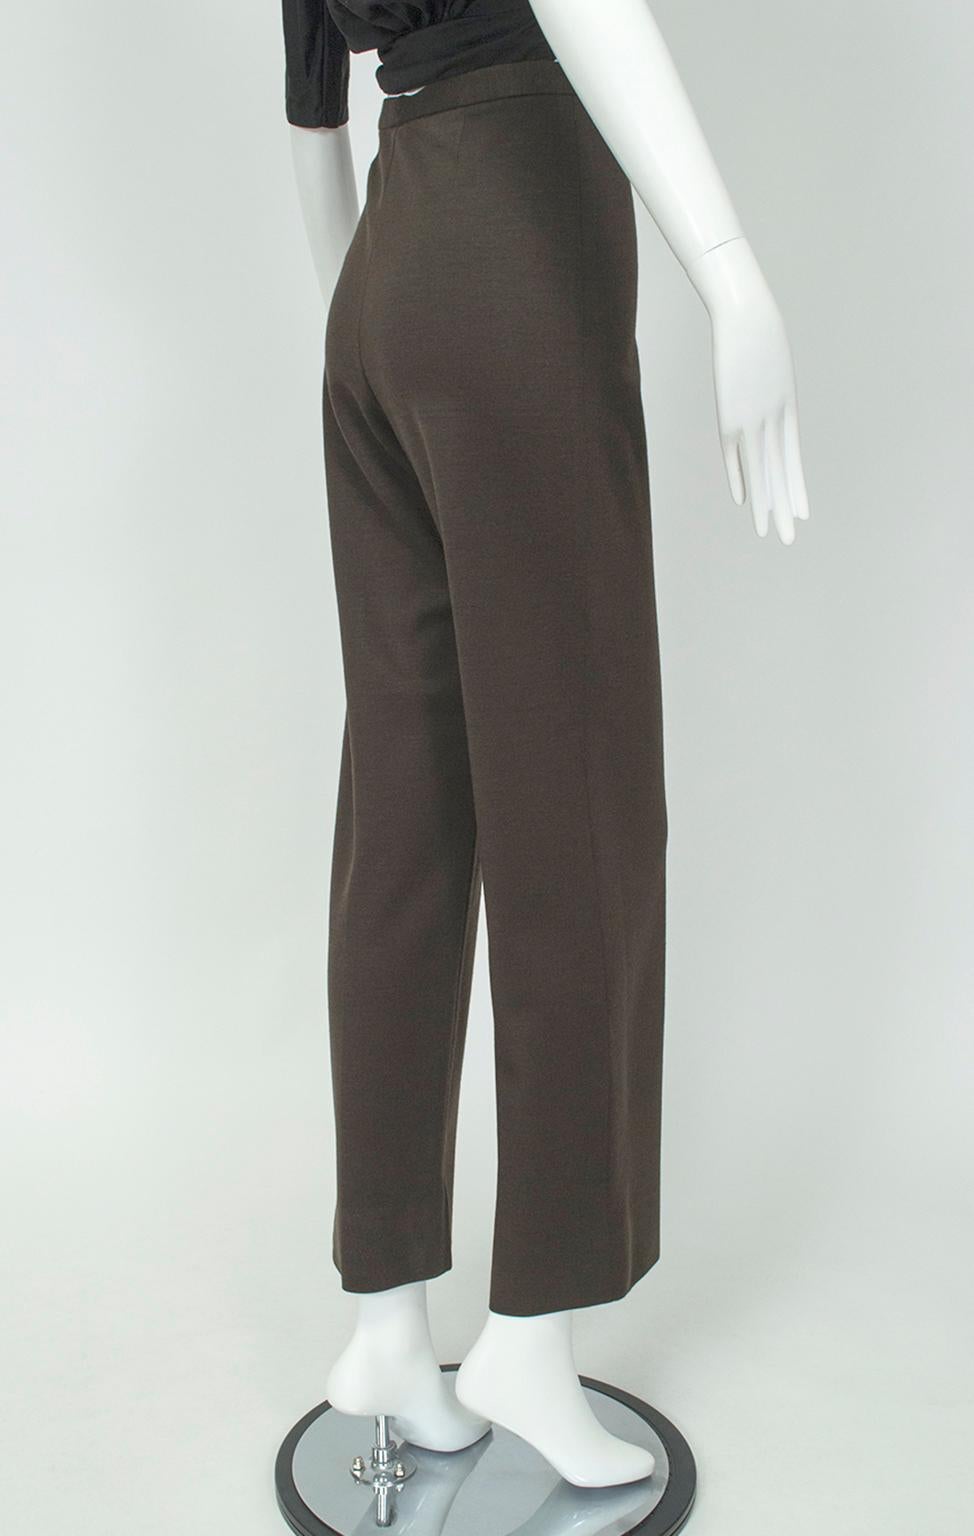 With their high waist and stovepipe silhouette, these elegant trousers will instantly add perceived length to your legs. (And yet there's a 3